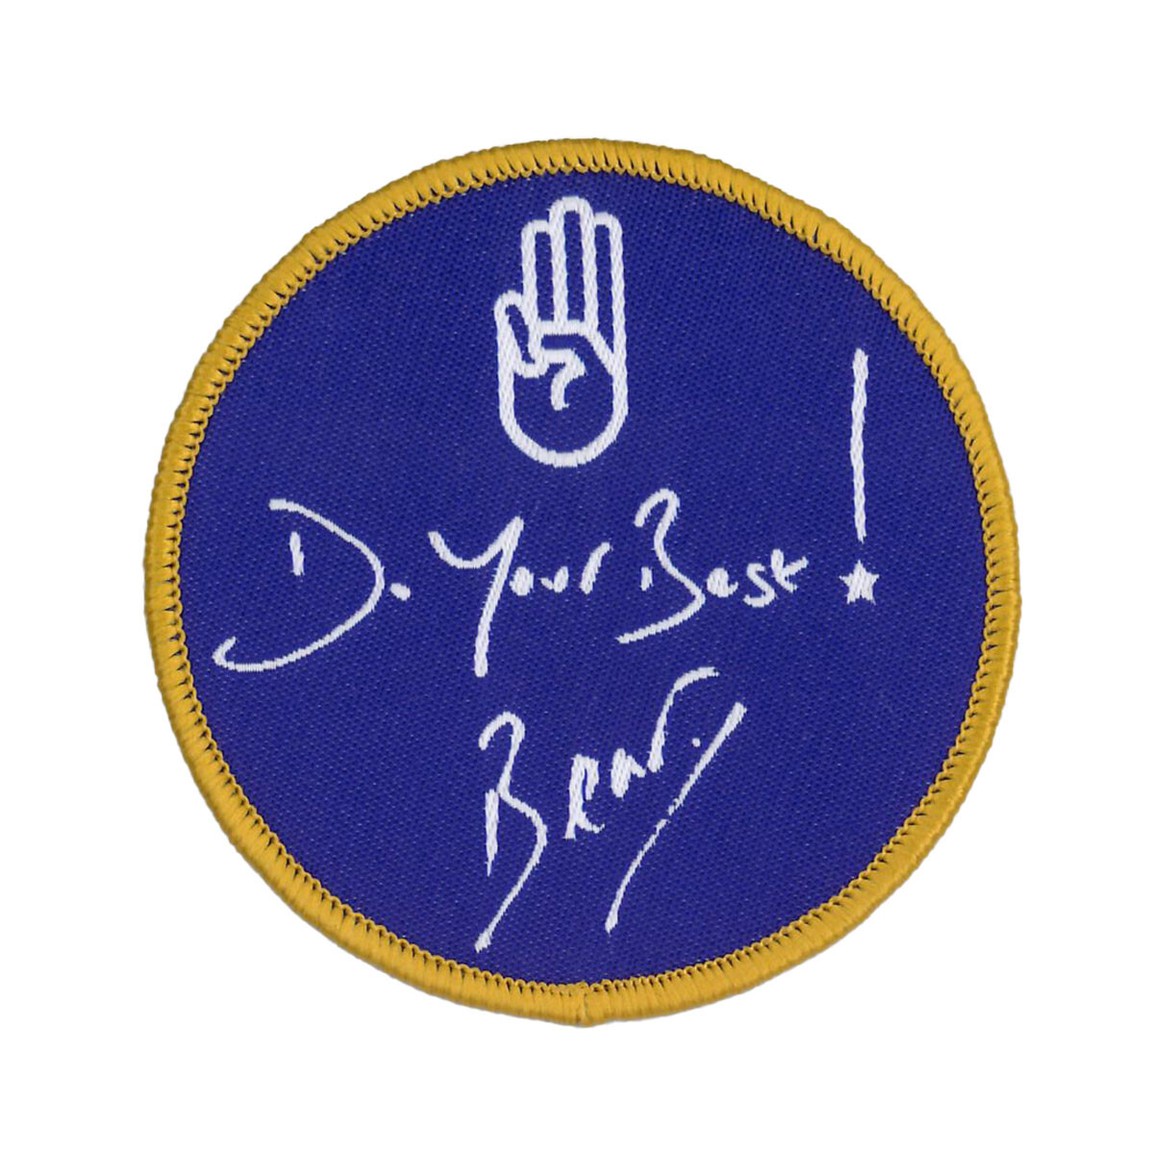 The image shows the purple Do Your Best badge with a gold outline, which is handwritten by Chief Scout Bear Grylls. It says 'Do Your Best!' and has Bear's signature underneath, with the Scout sign above.